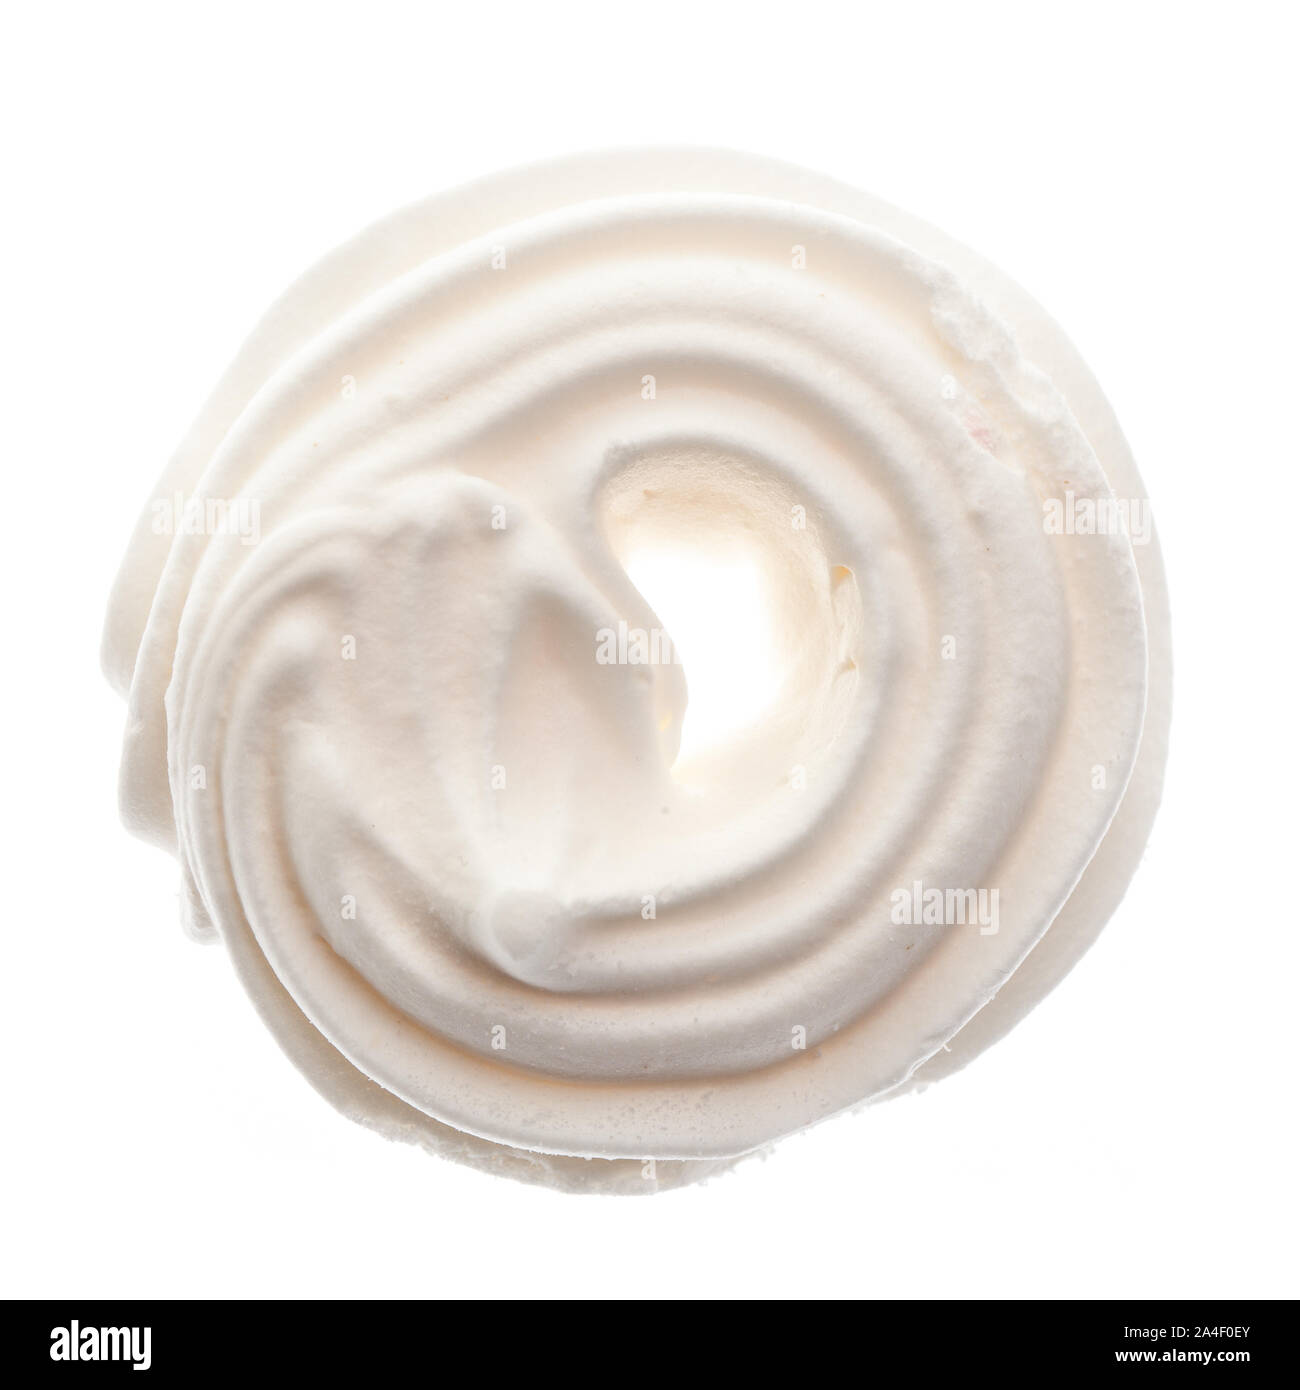 Christmas cookies: Single 'Windgebäck' (wind pastry)  from above isolated on white background Stock Photo